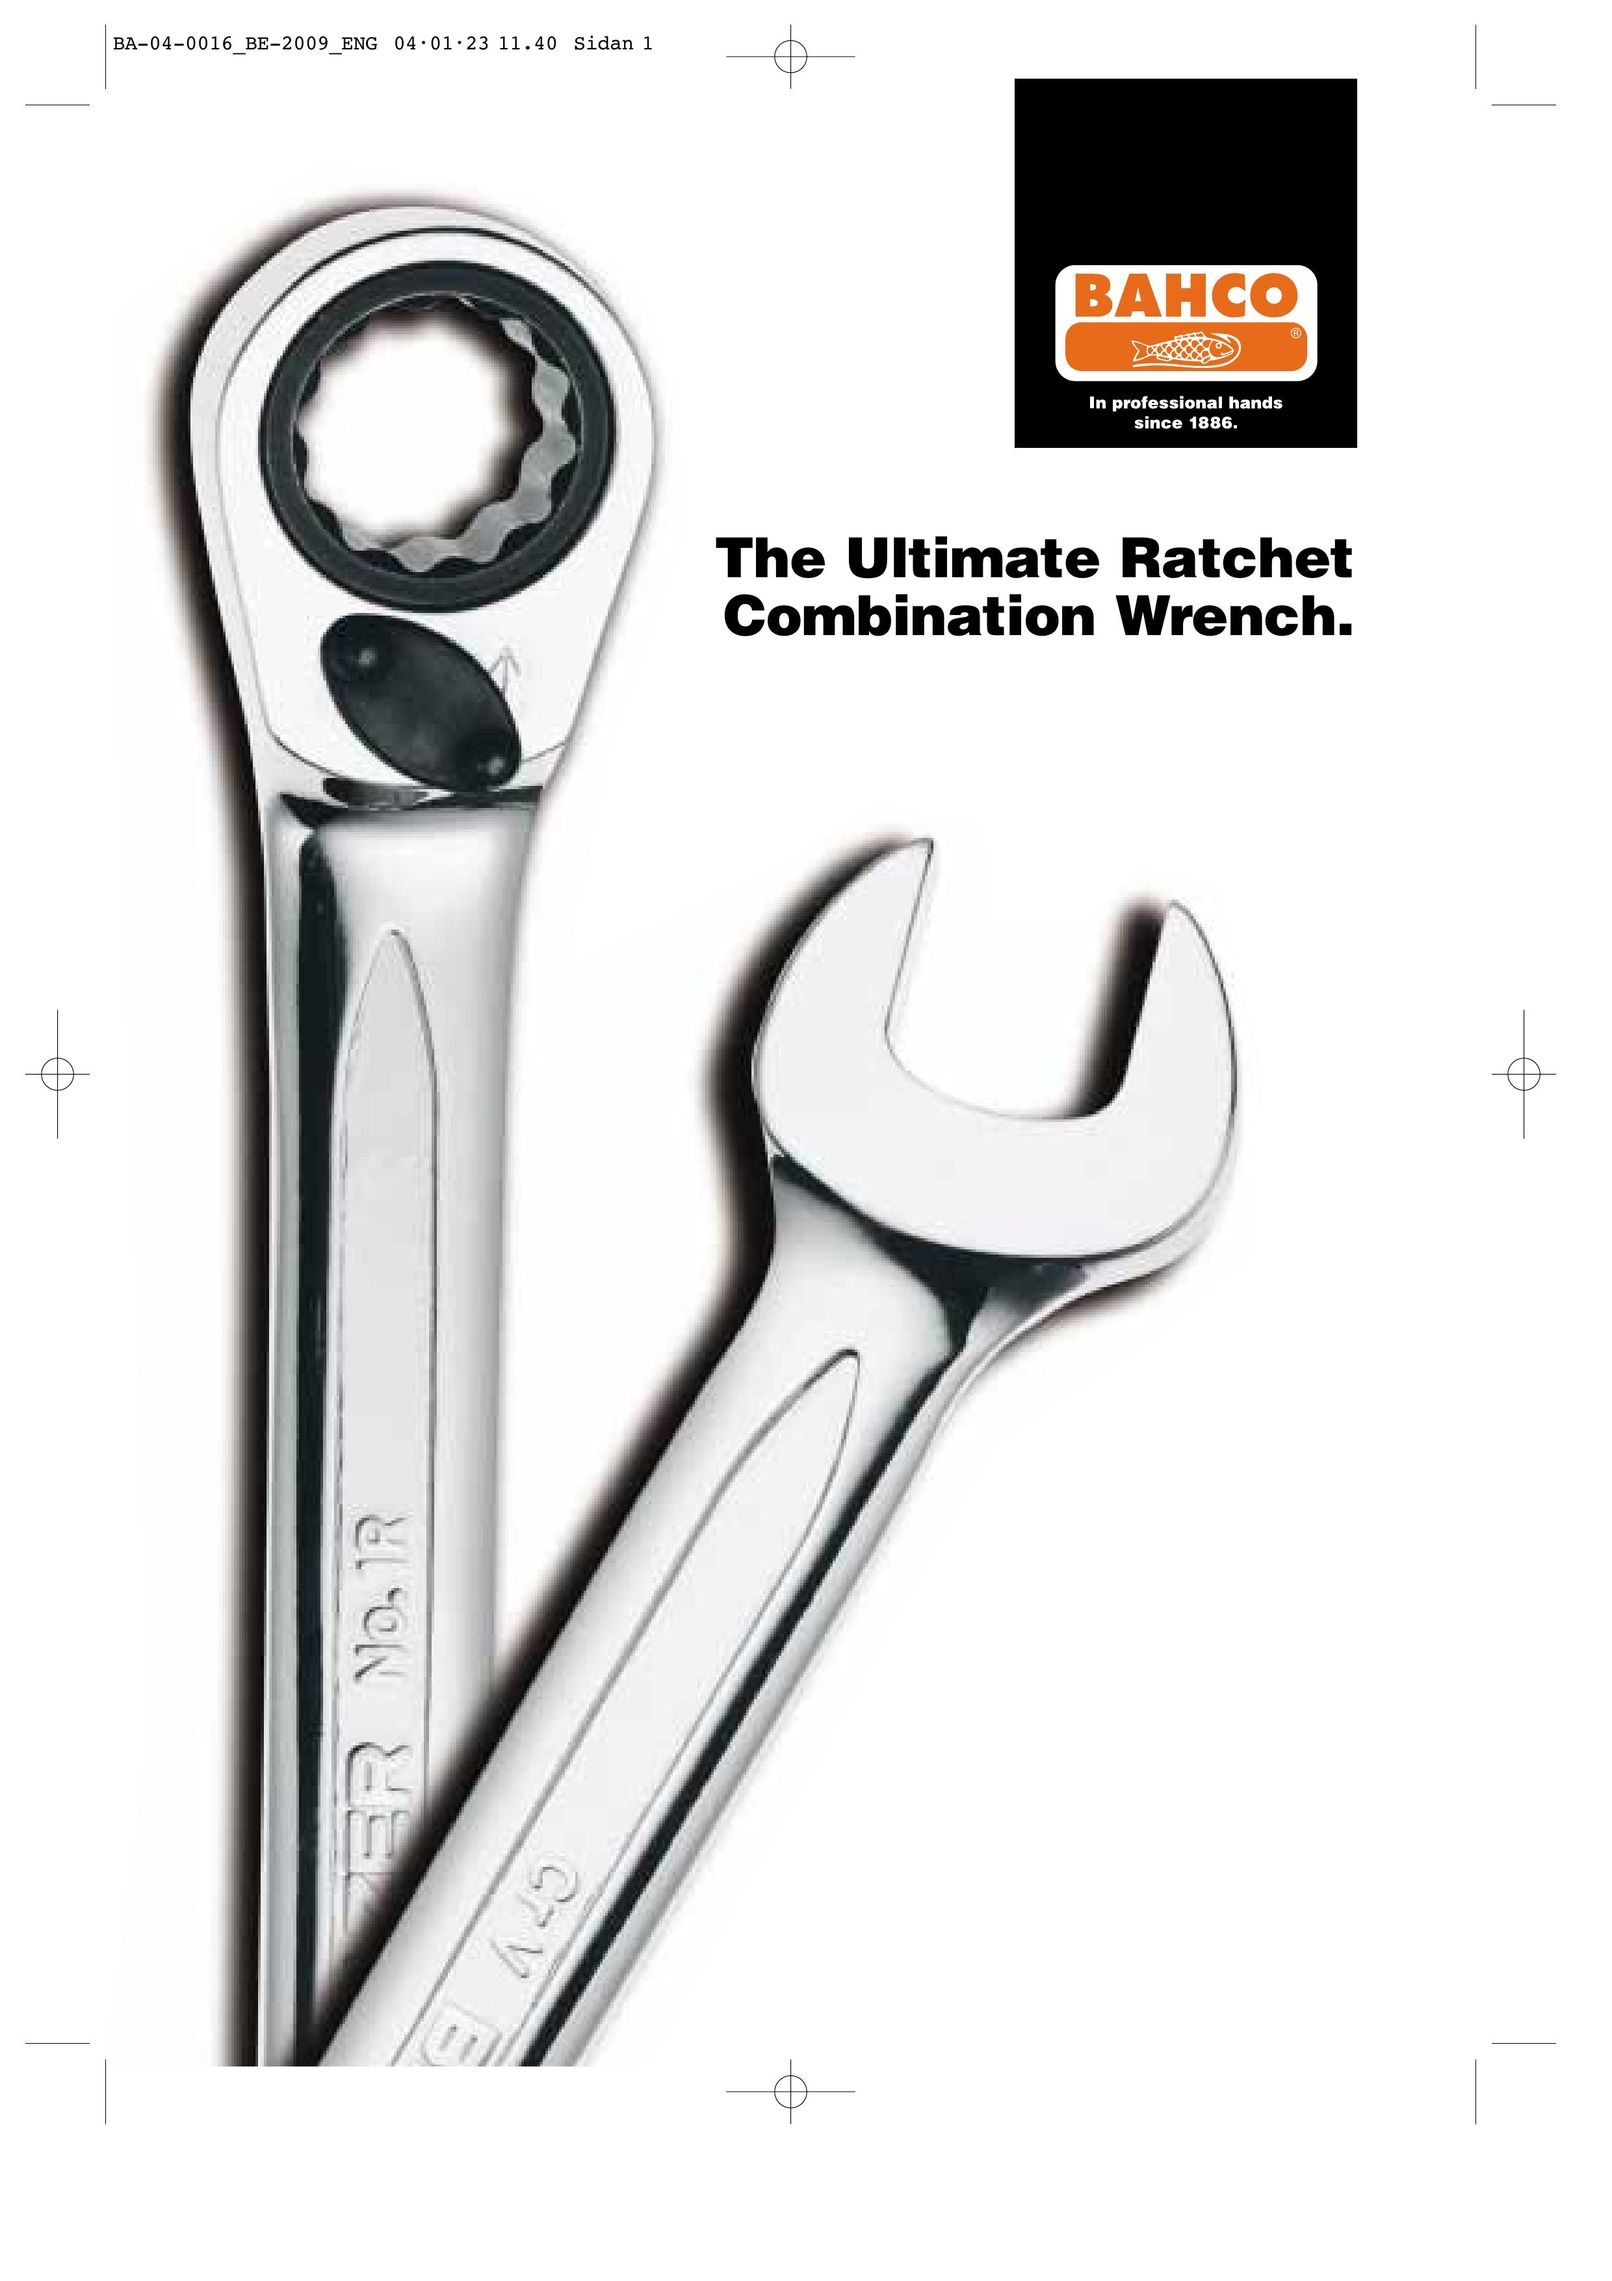 Bahco Ratchet Combination Wrench Impact Driver User Manual